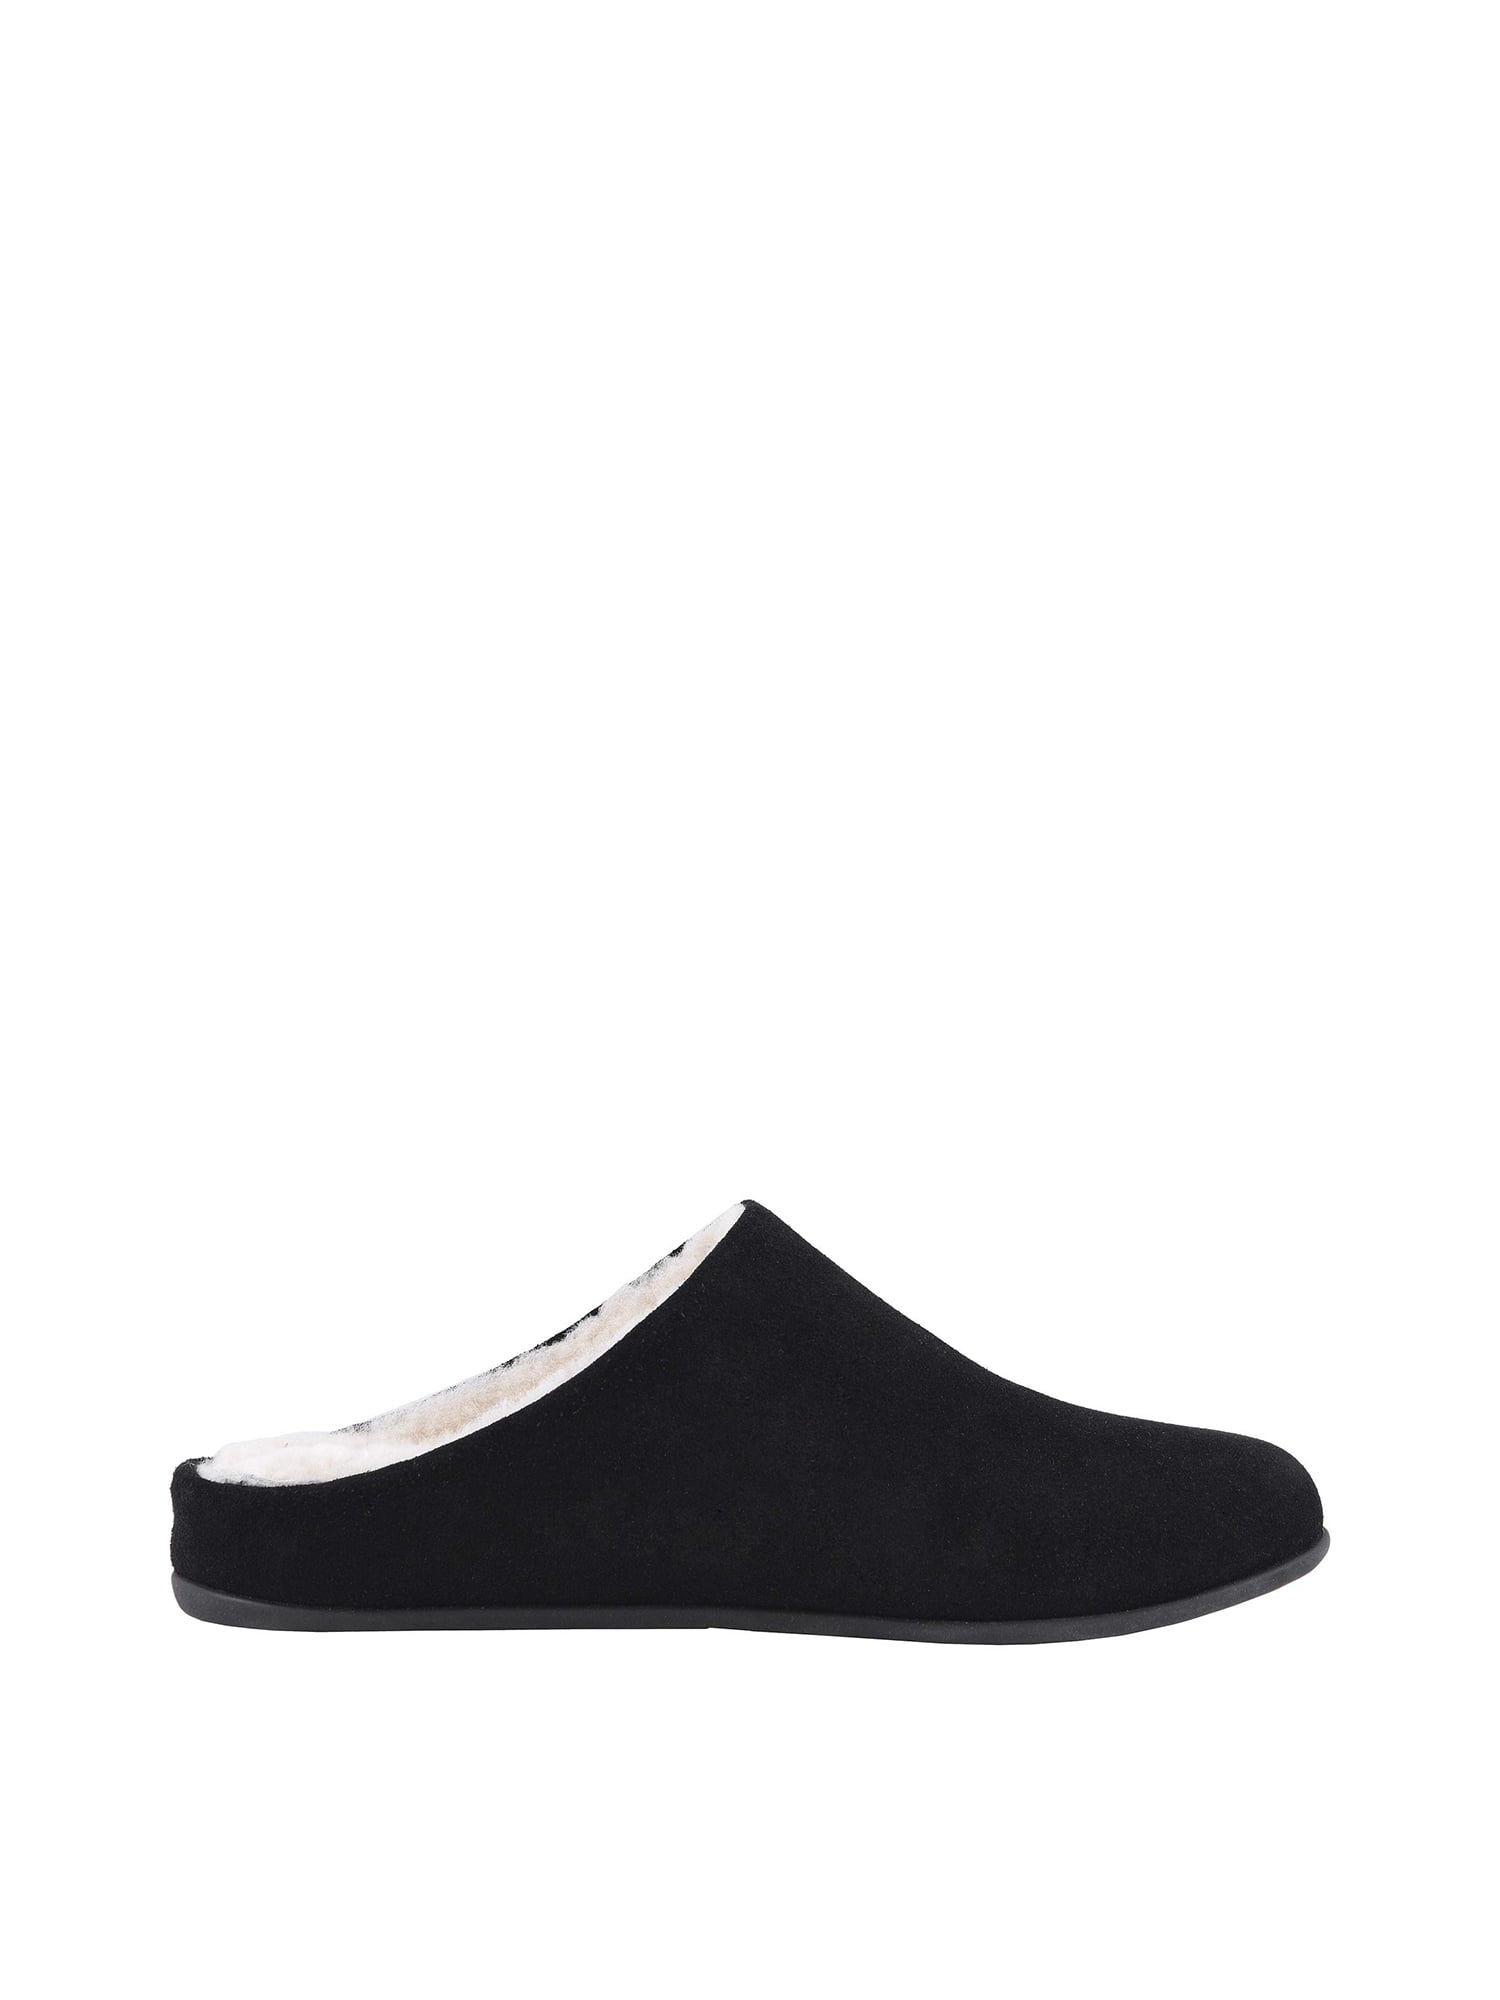 fitflop suede